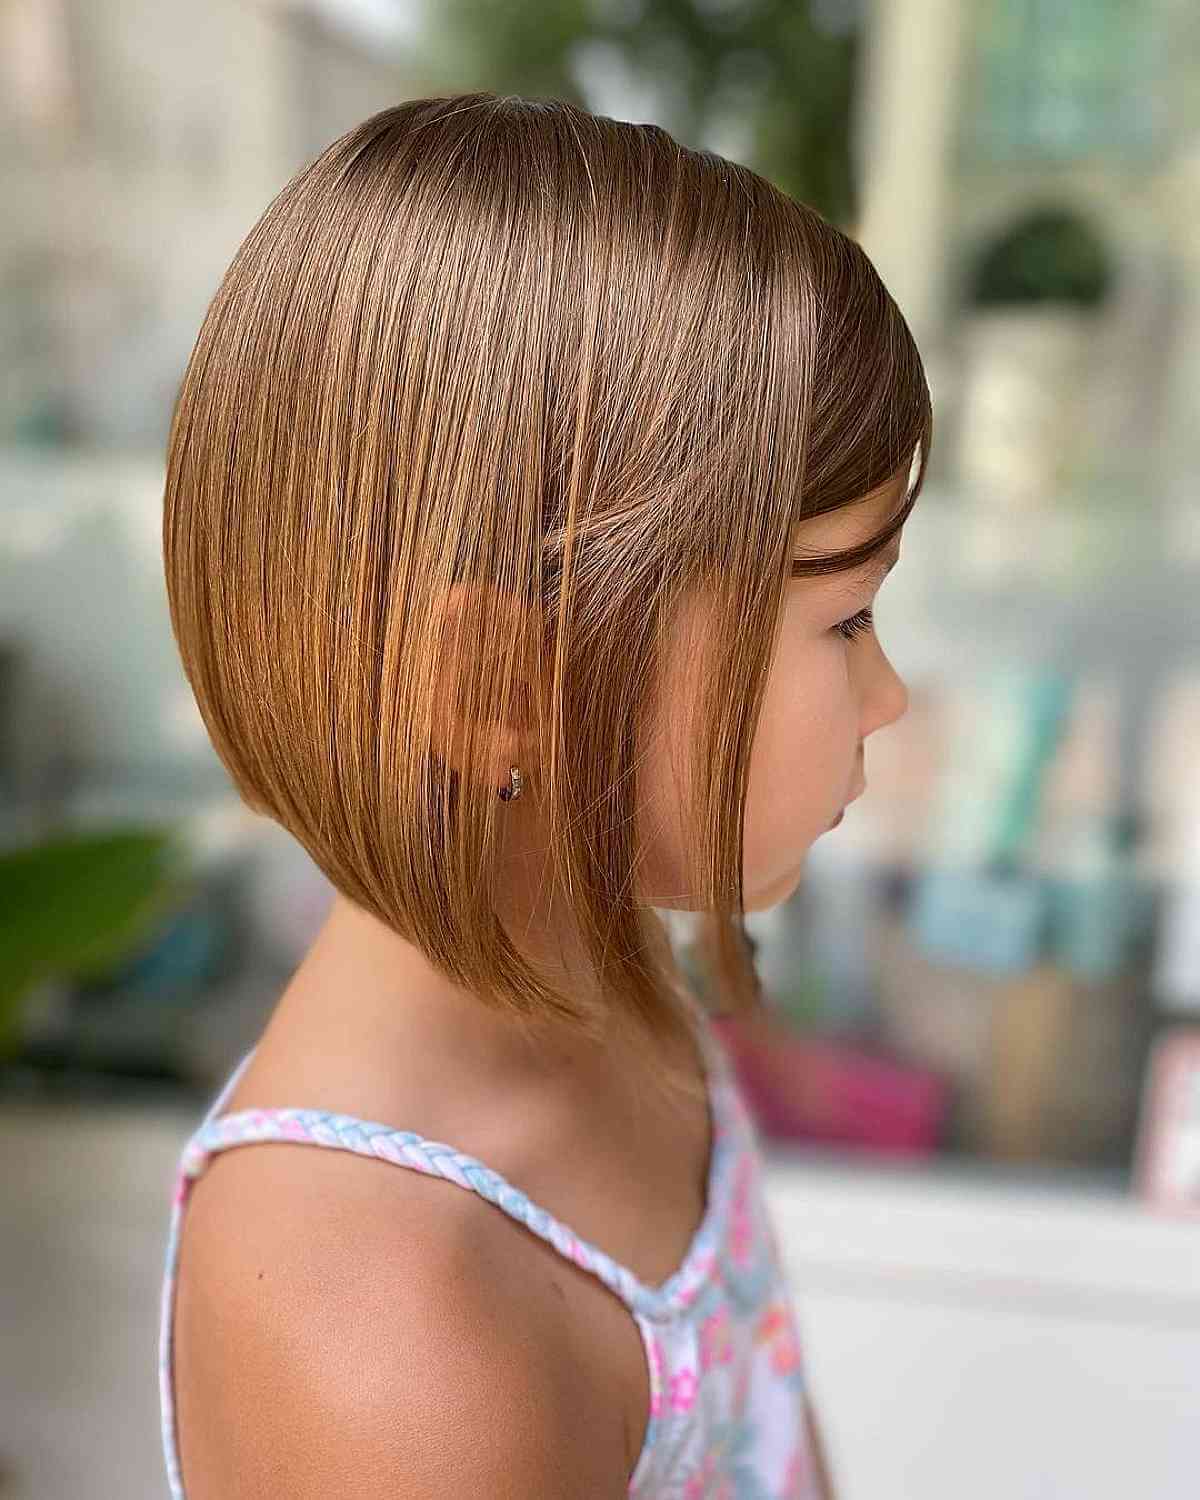 23 Cutest Short Hairstyles For Little Girls in 2023